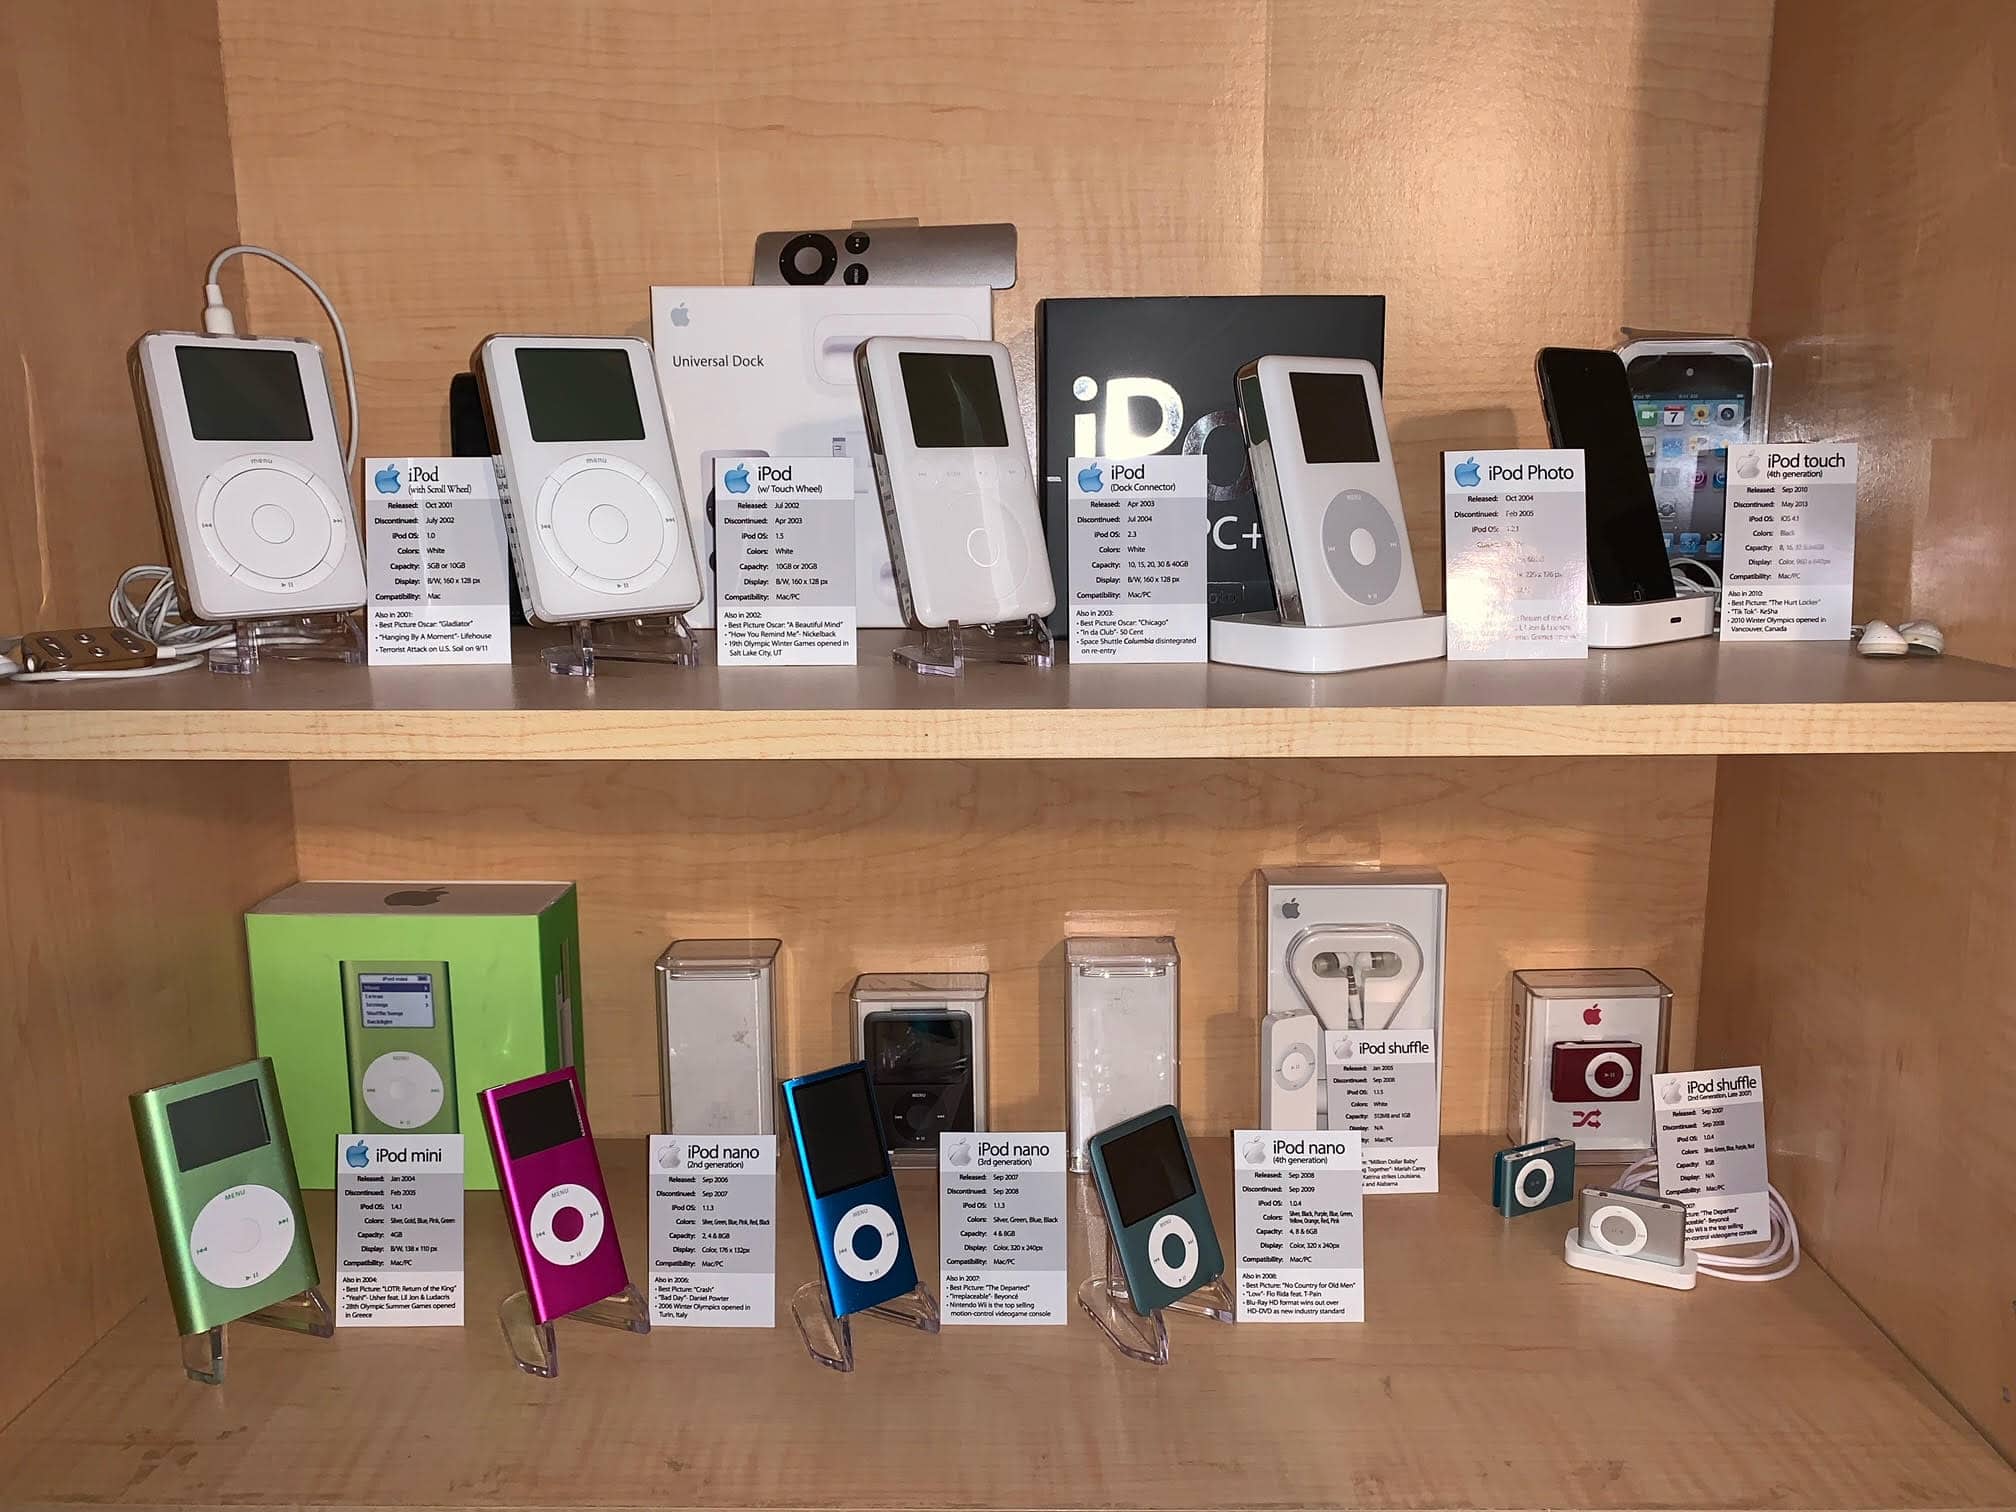 Here's a tighter shot of iPod City. 